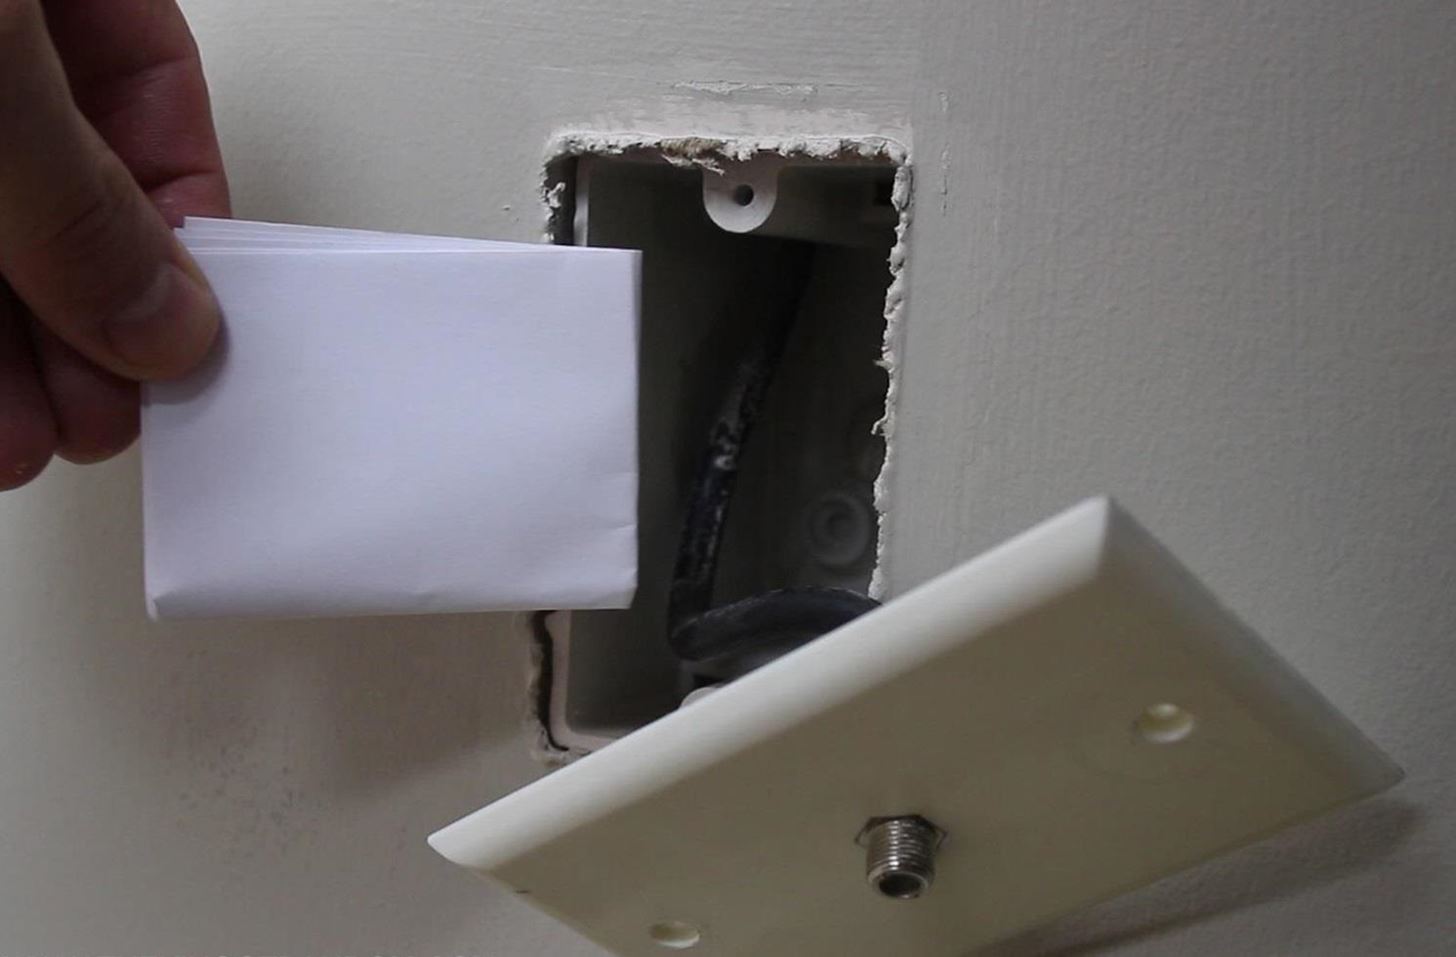 How to Make a Super Secret Wall Safe for Less Than $3